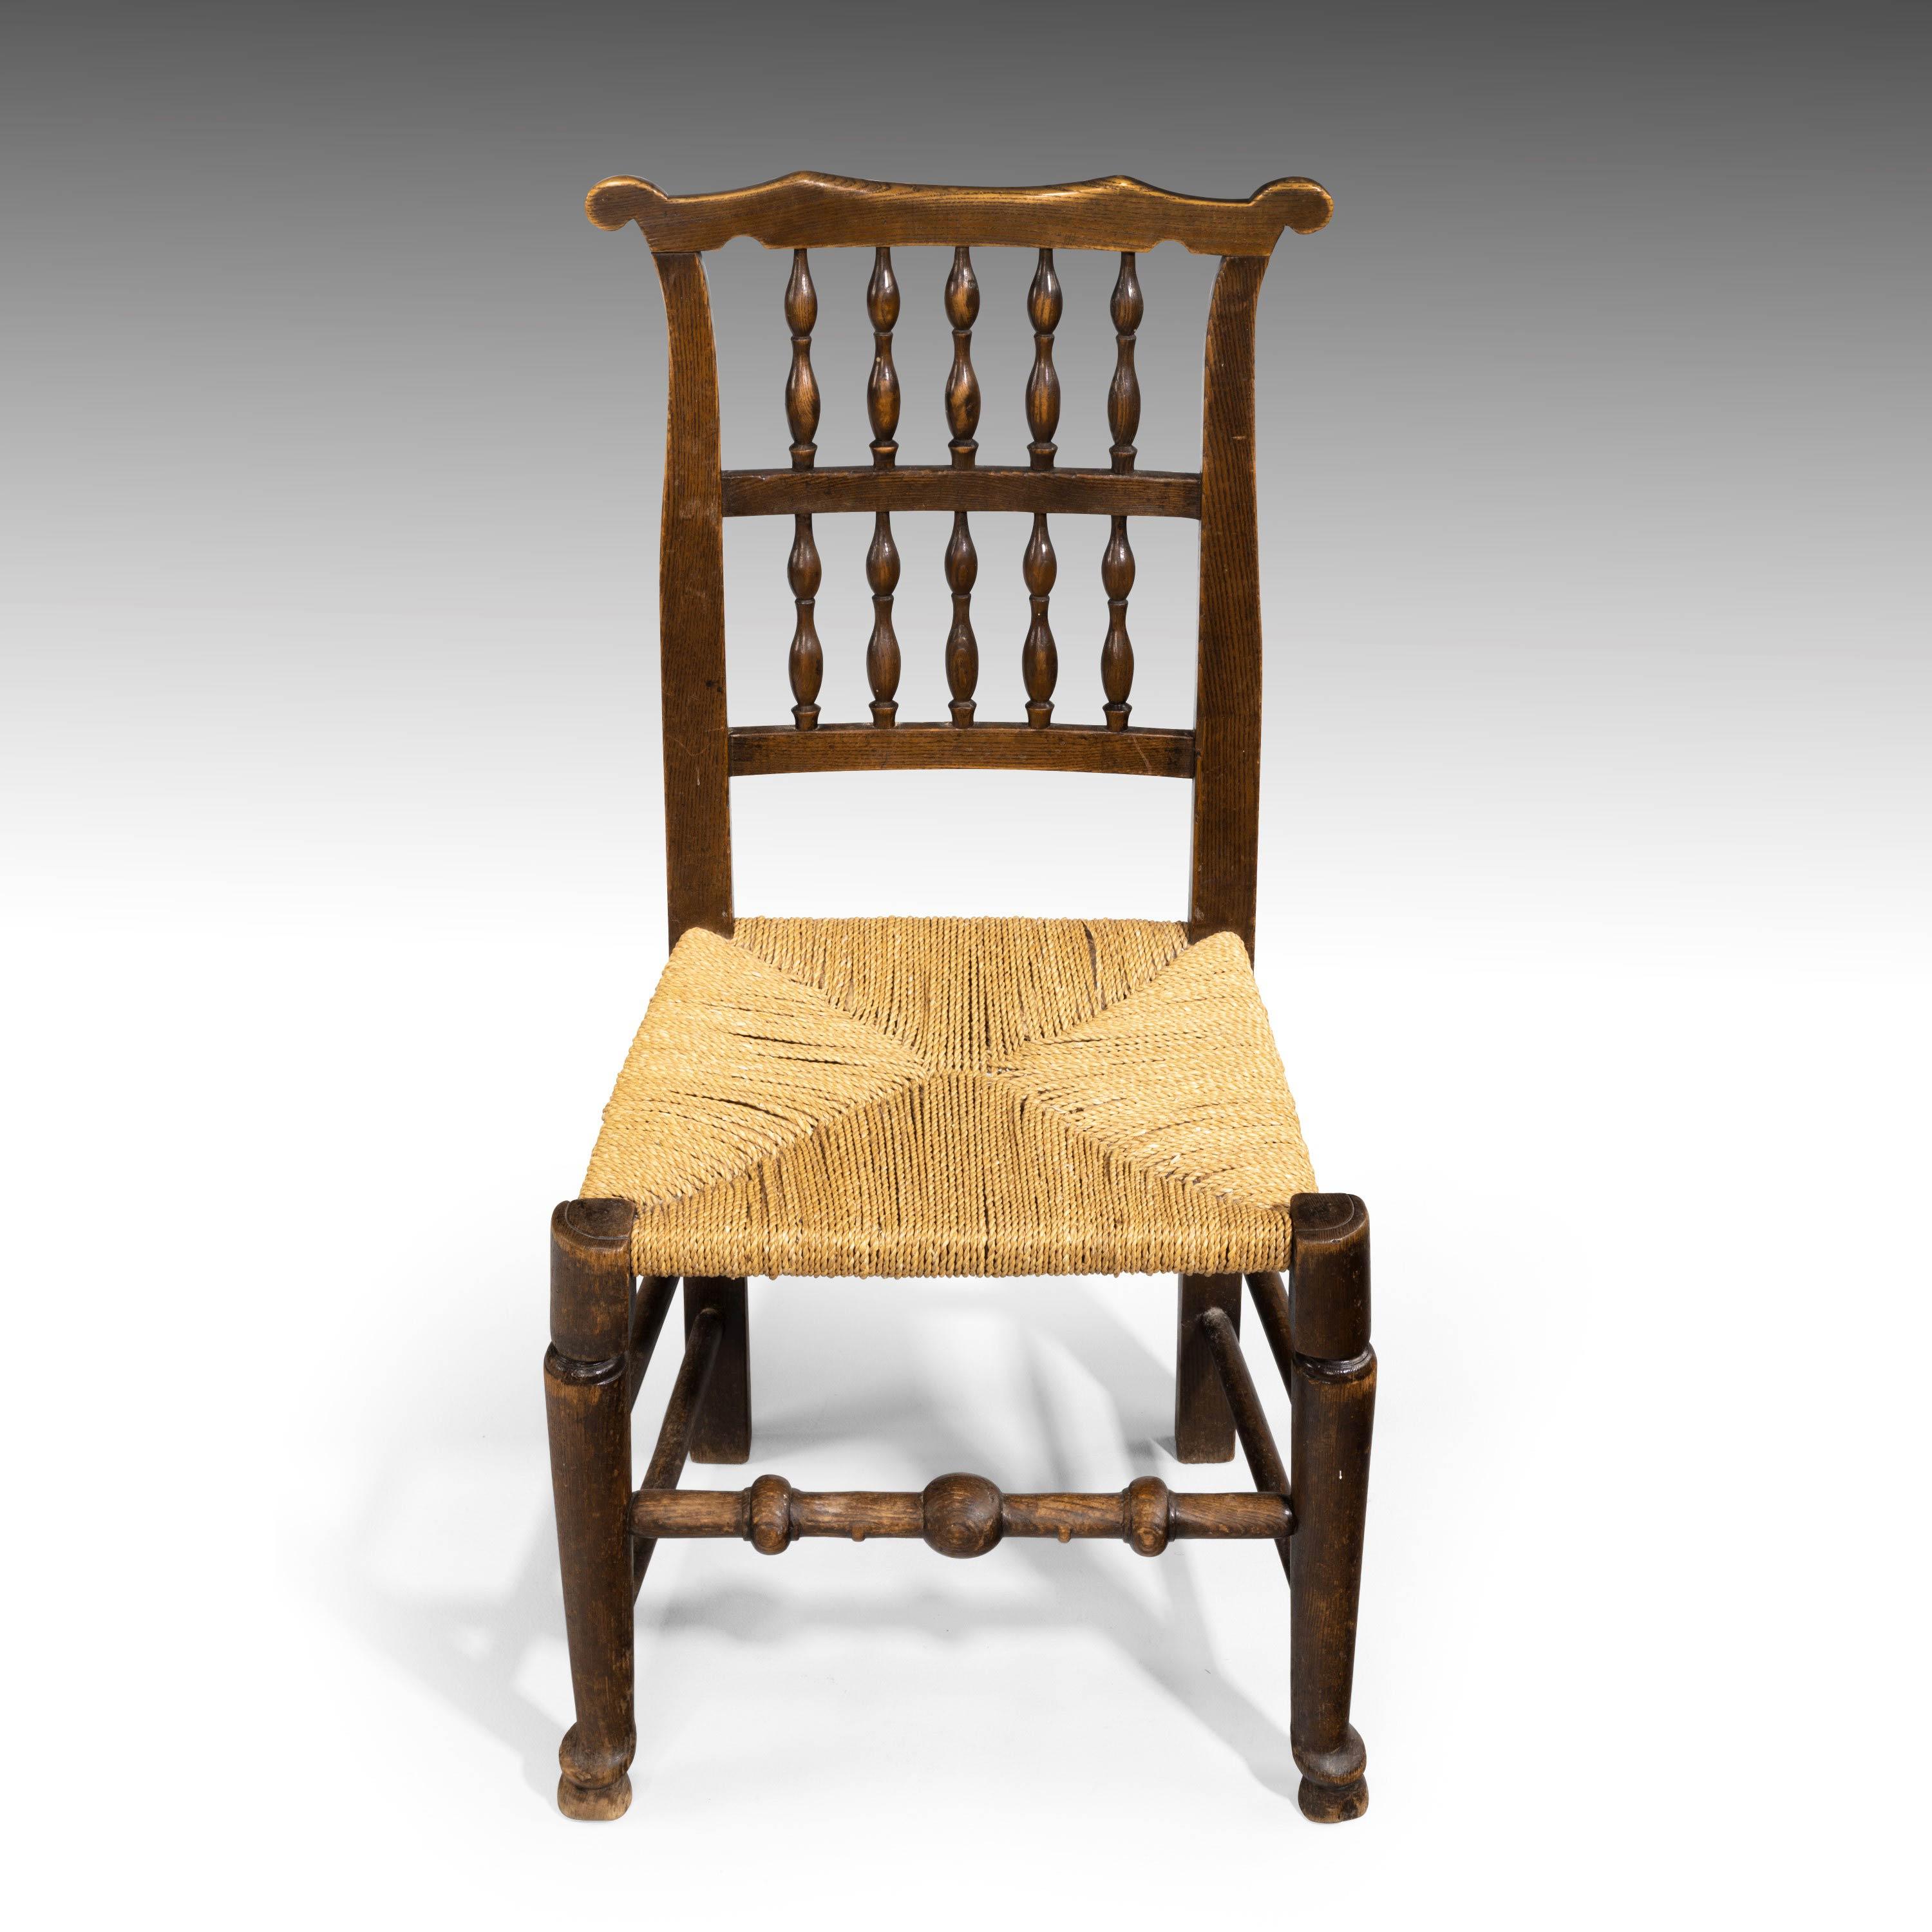 An attractive elm spindleback armchair with a rush seat, mid-19th century. Excellent overall conditional and patina. Measures: Seat height 16.5